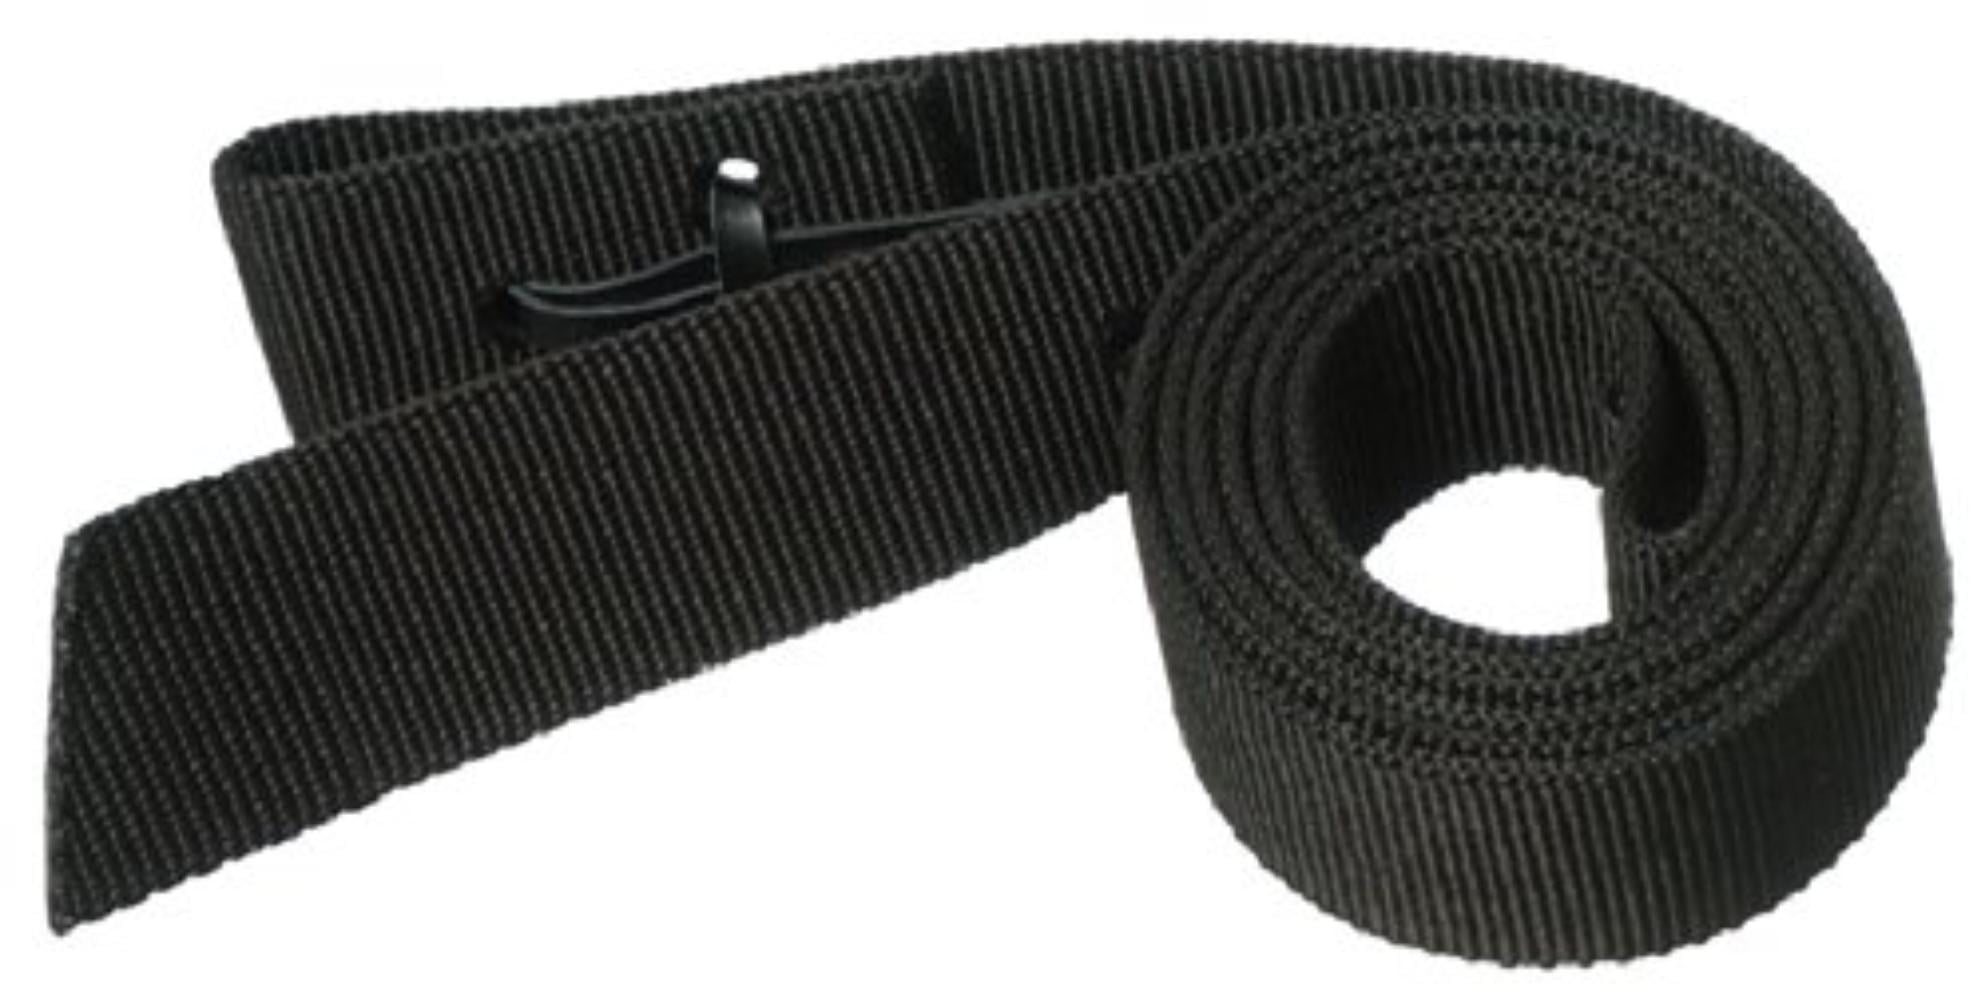 Military Nylon Webbing Textile Belt 1-3/4" Green strapping Tie-Down Craft strap 